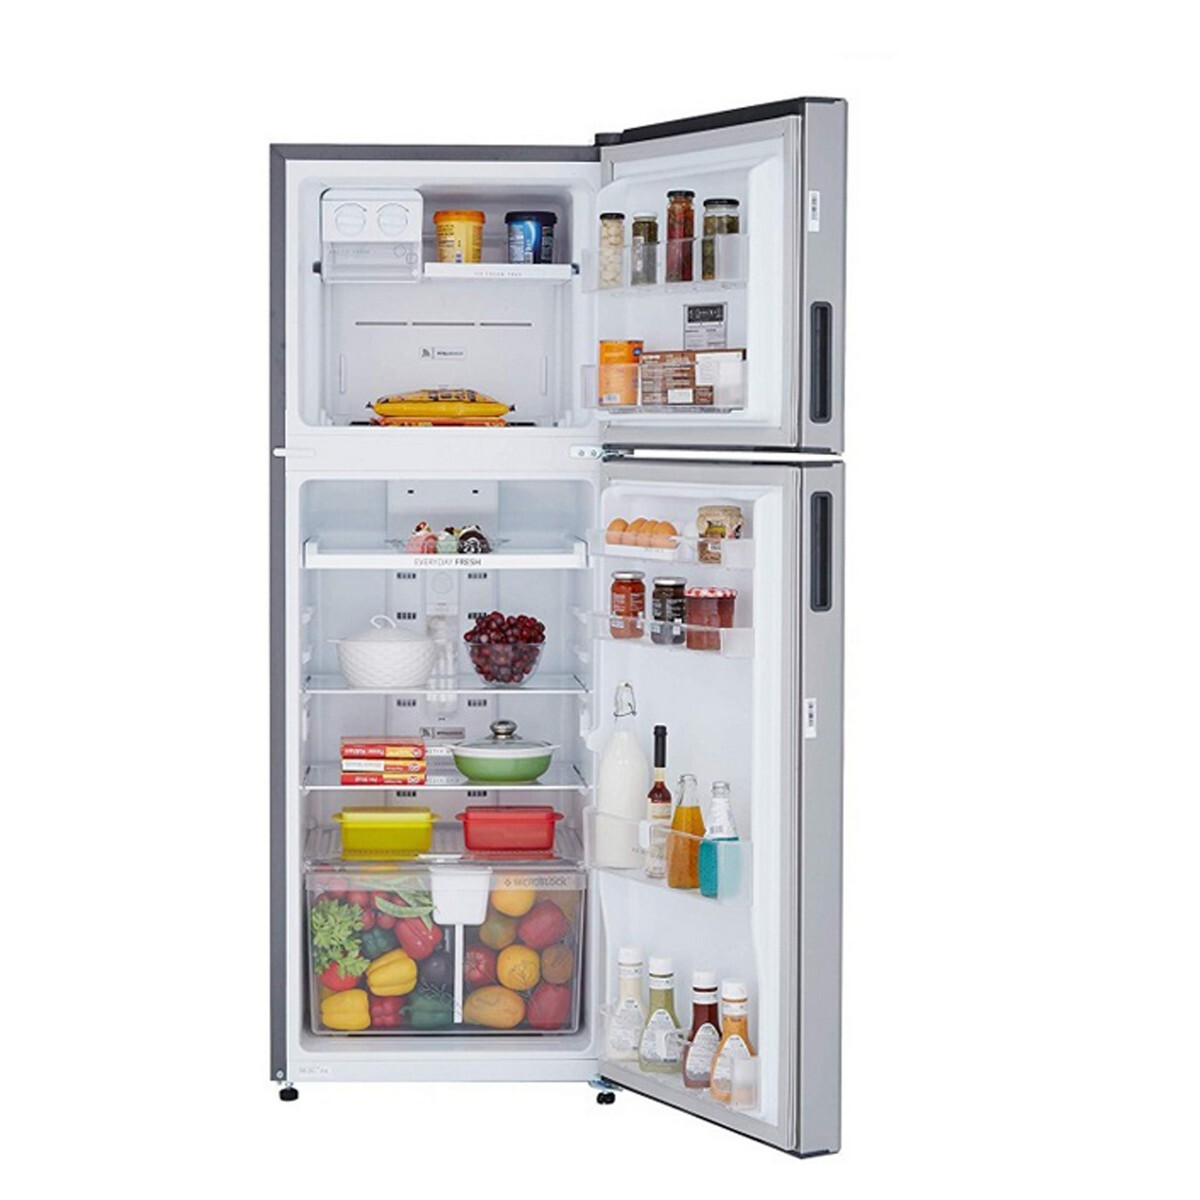 Whirlpool 265 L 3 Star Frost Free Inverter Double Door Refrigerator IF INV CNV 278 COOL ILLUSIA